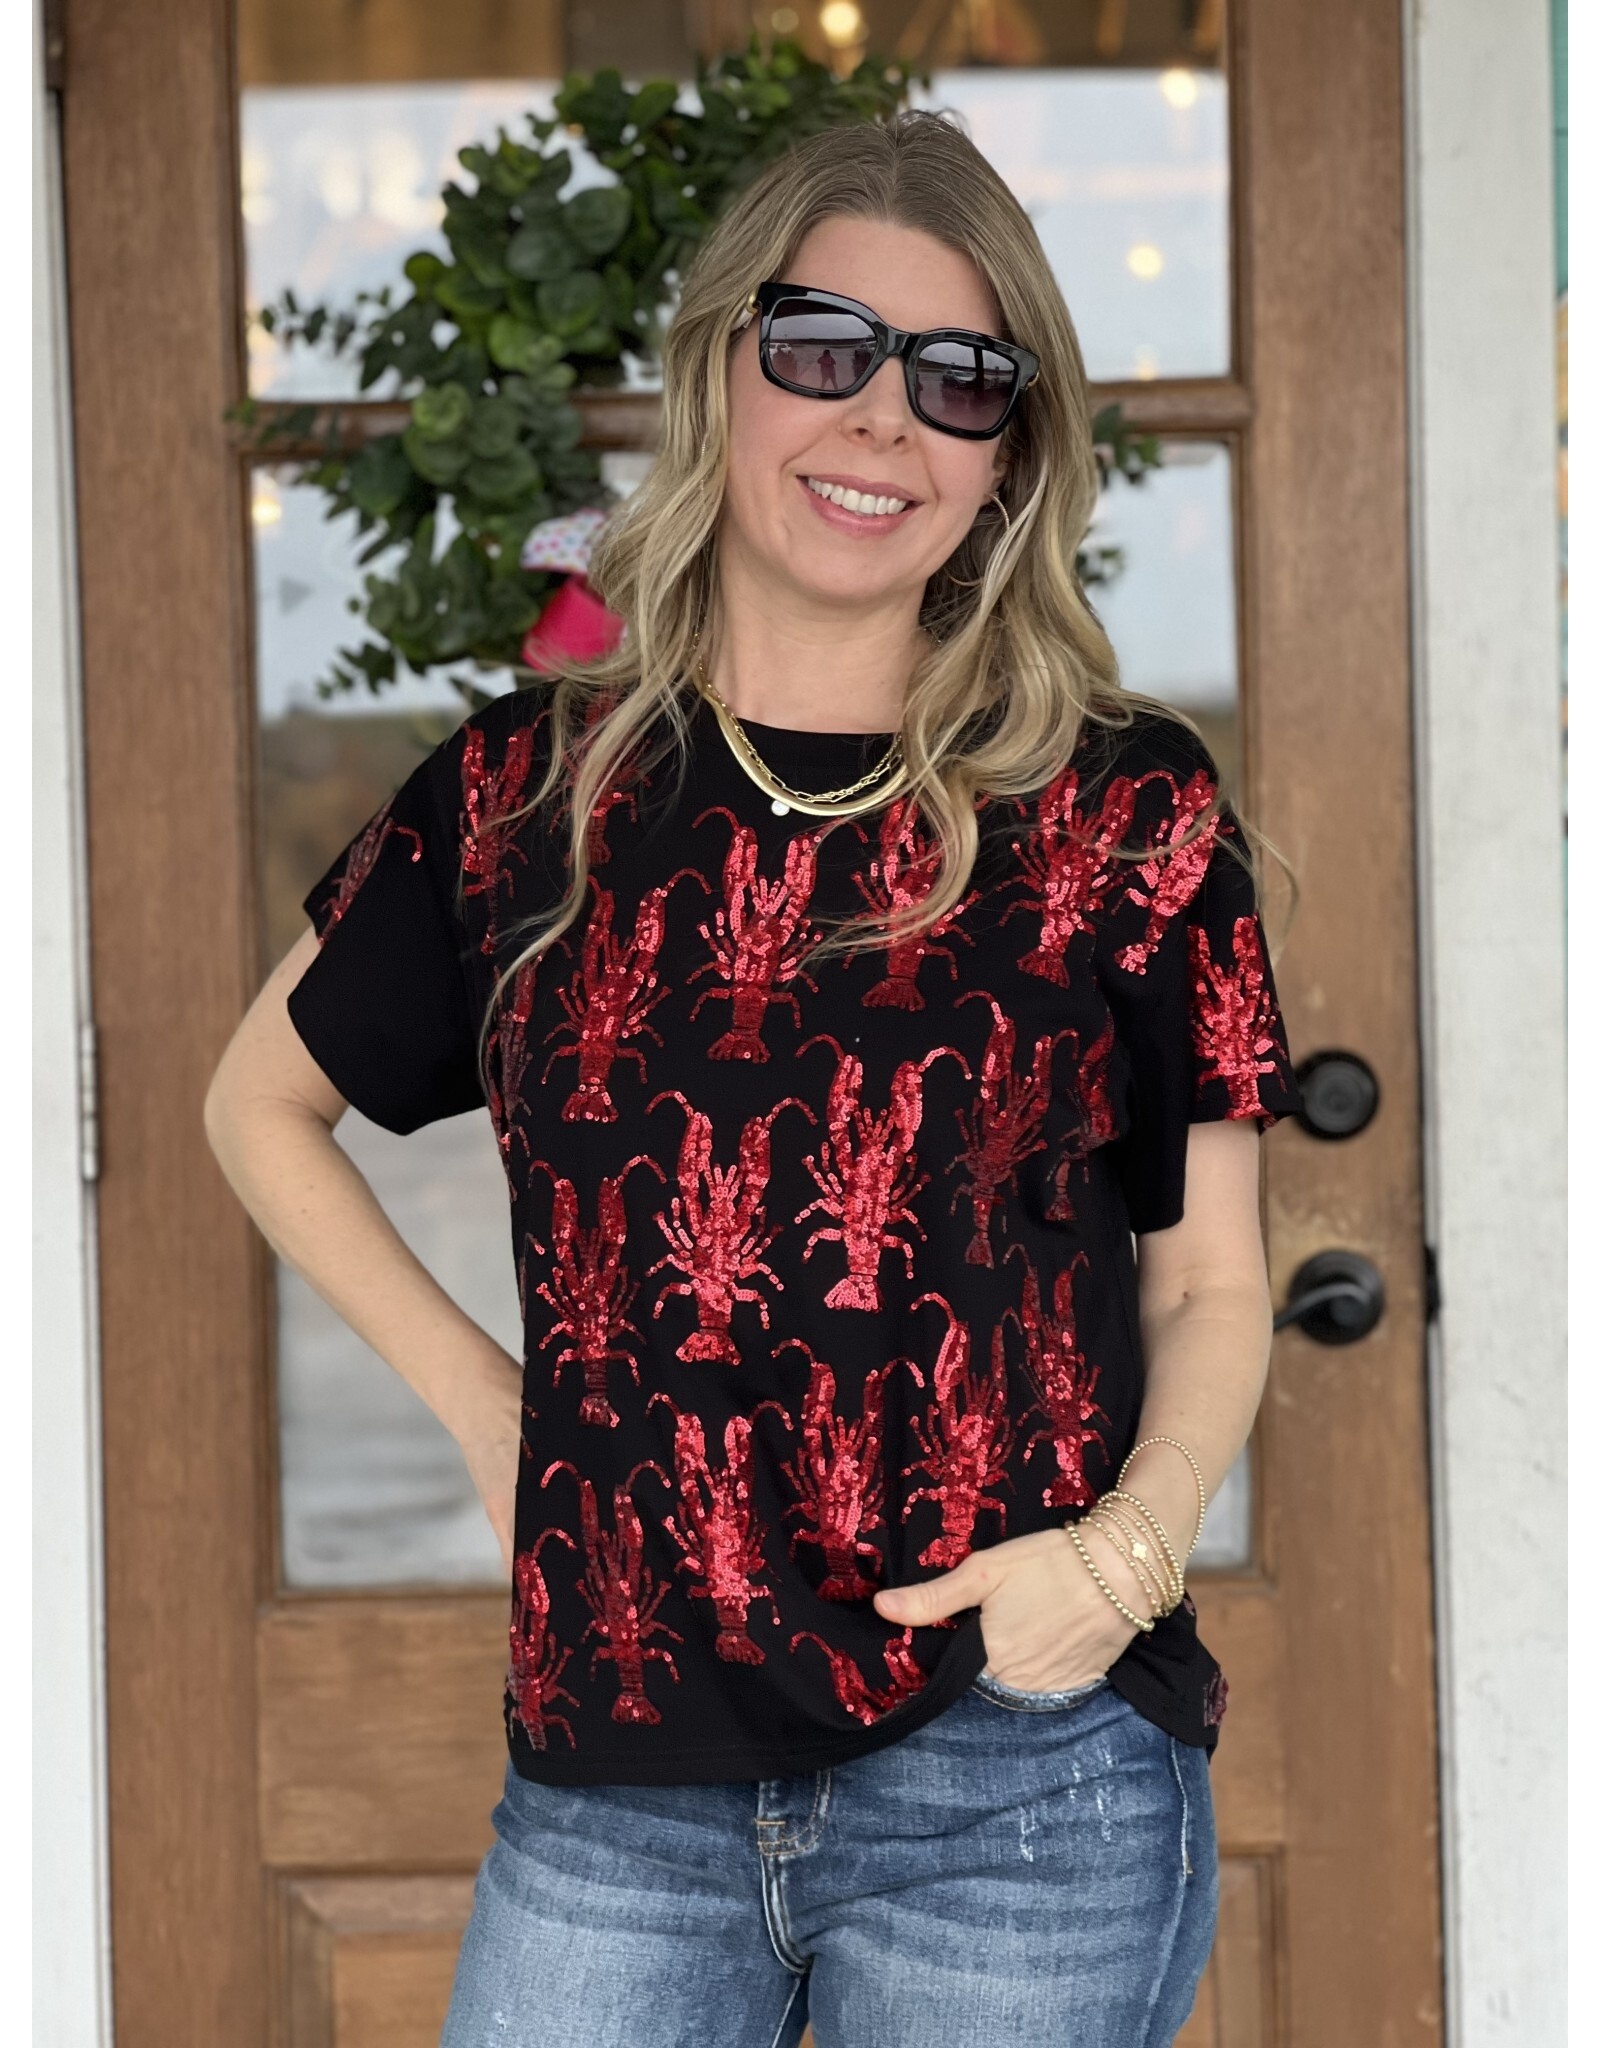 Queen of Sparkles Black & Red Crawfish Tee